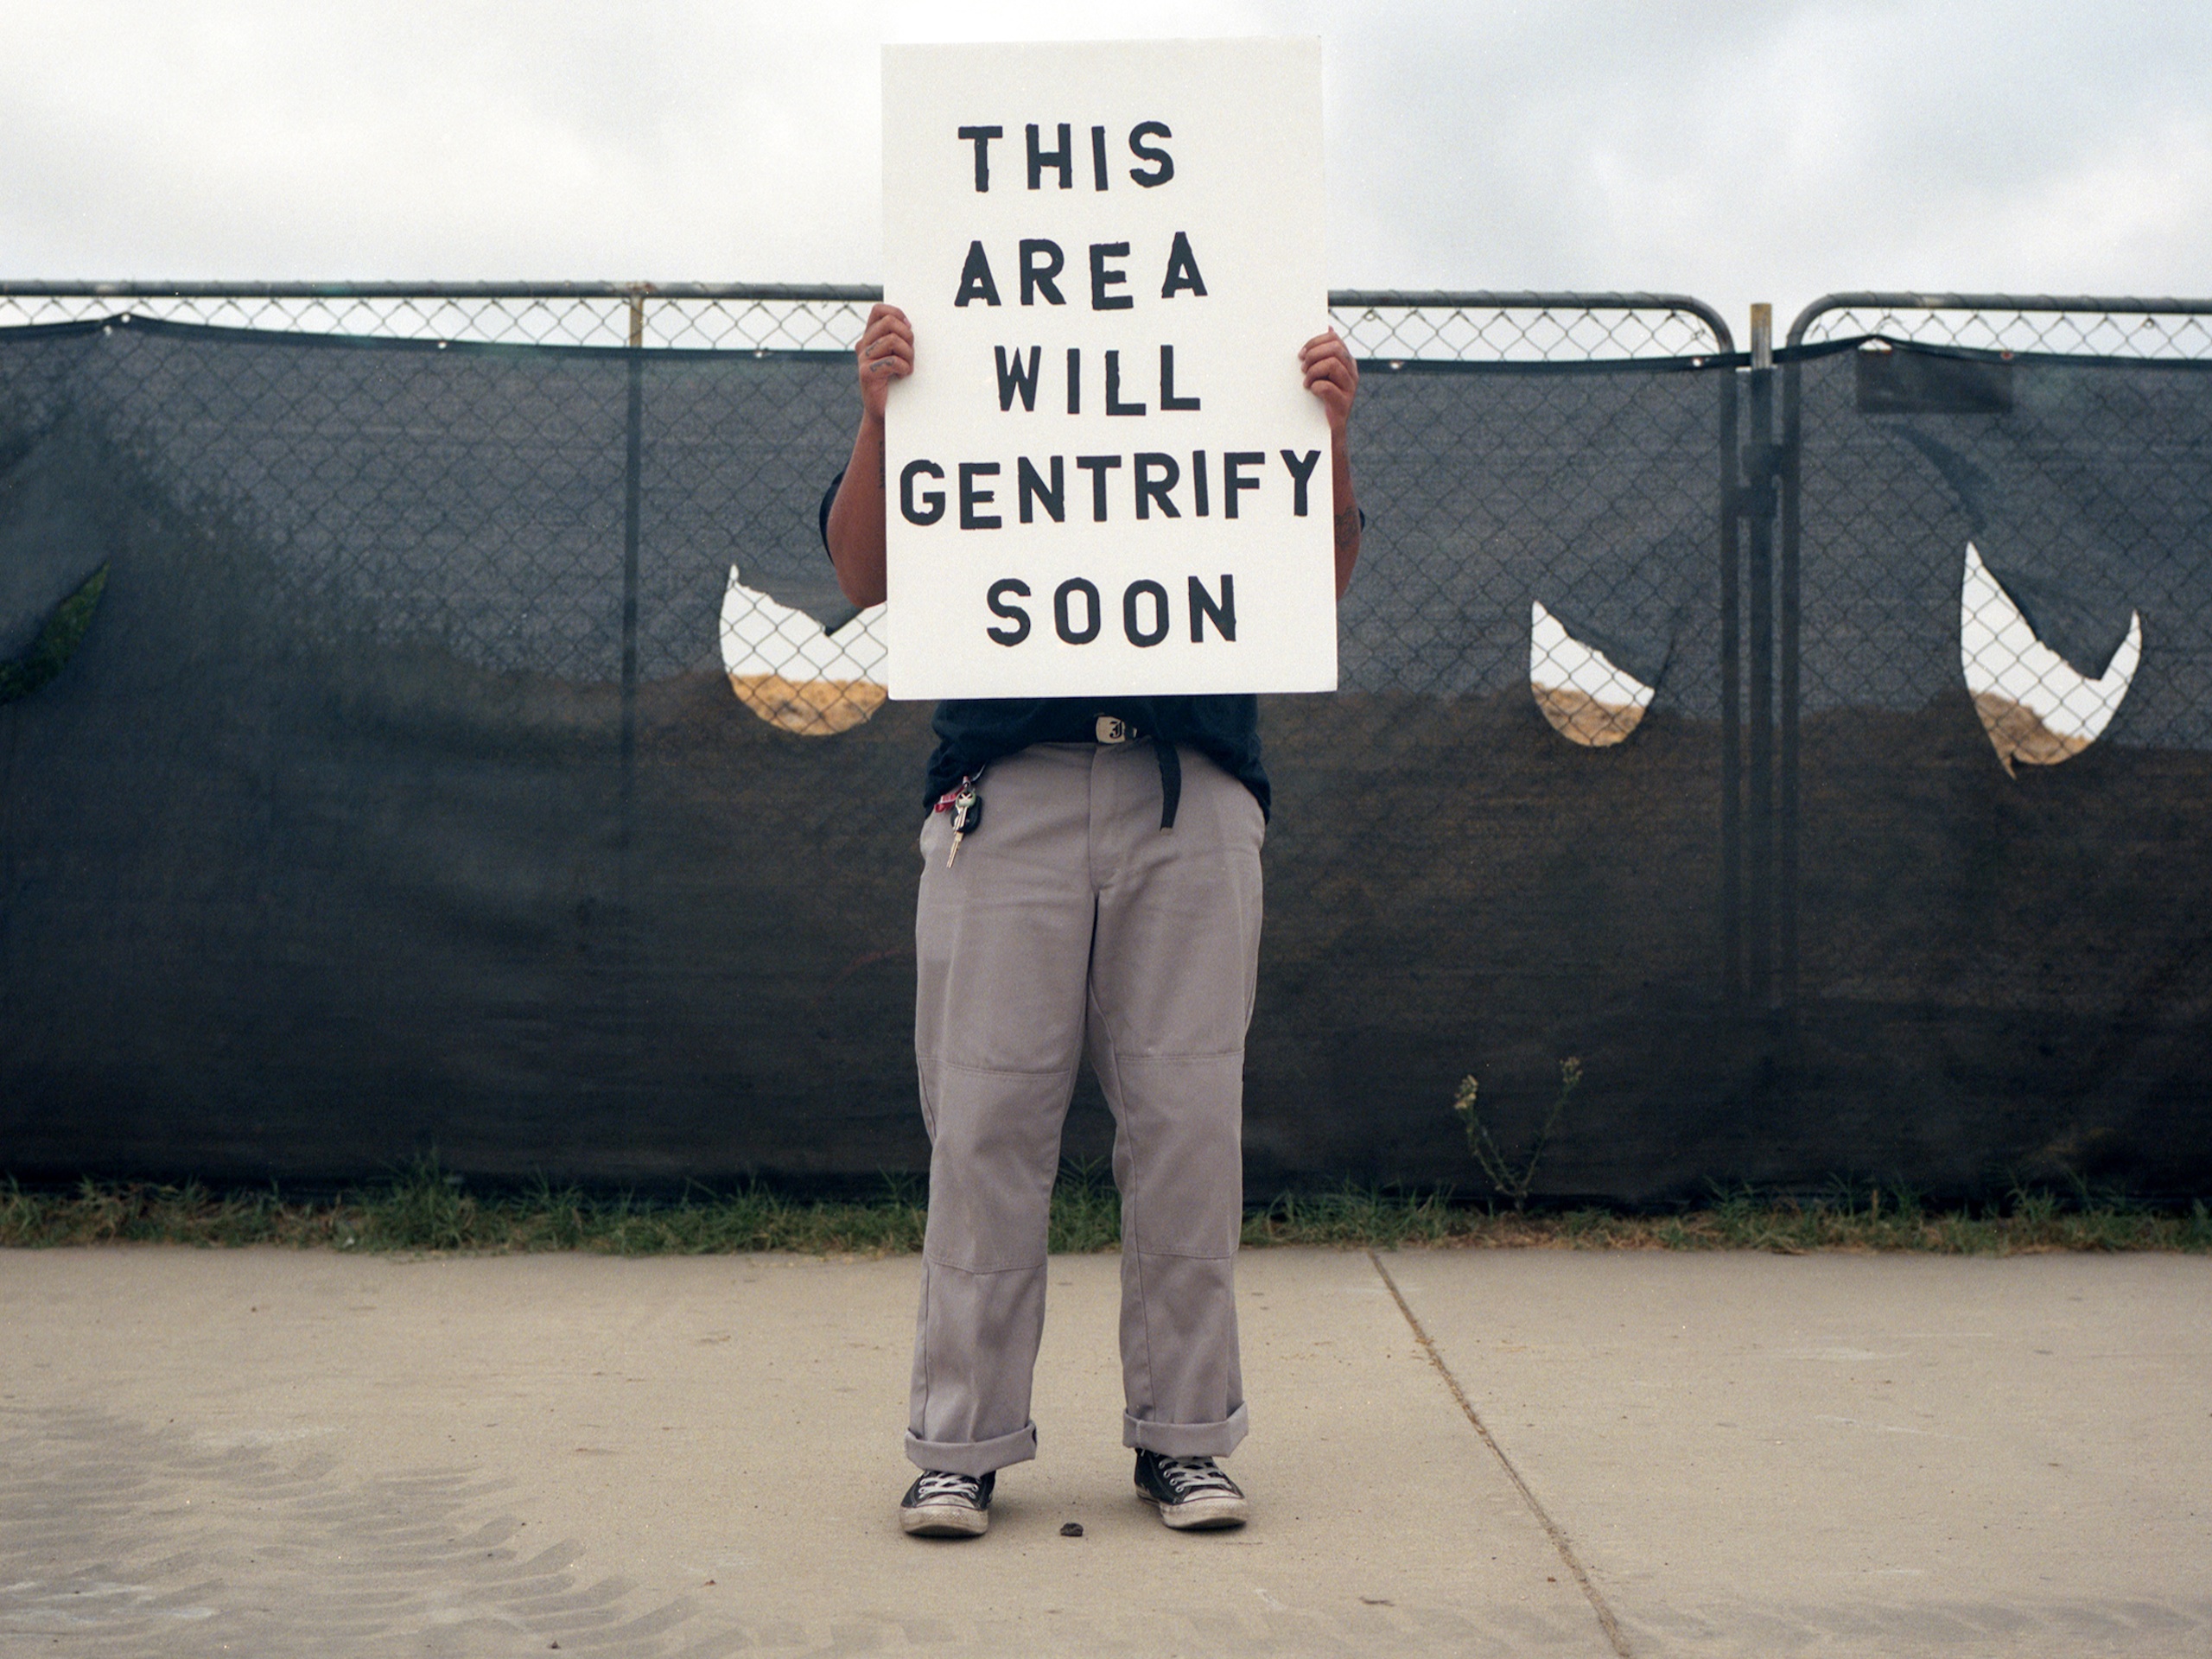 Artist stands on sidewalk in front of a material covered chain link fence holding a sign in front of his body that read "THIS AREA WILL GENTRIFY SOON"